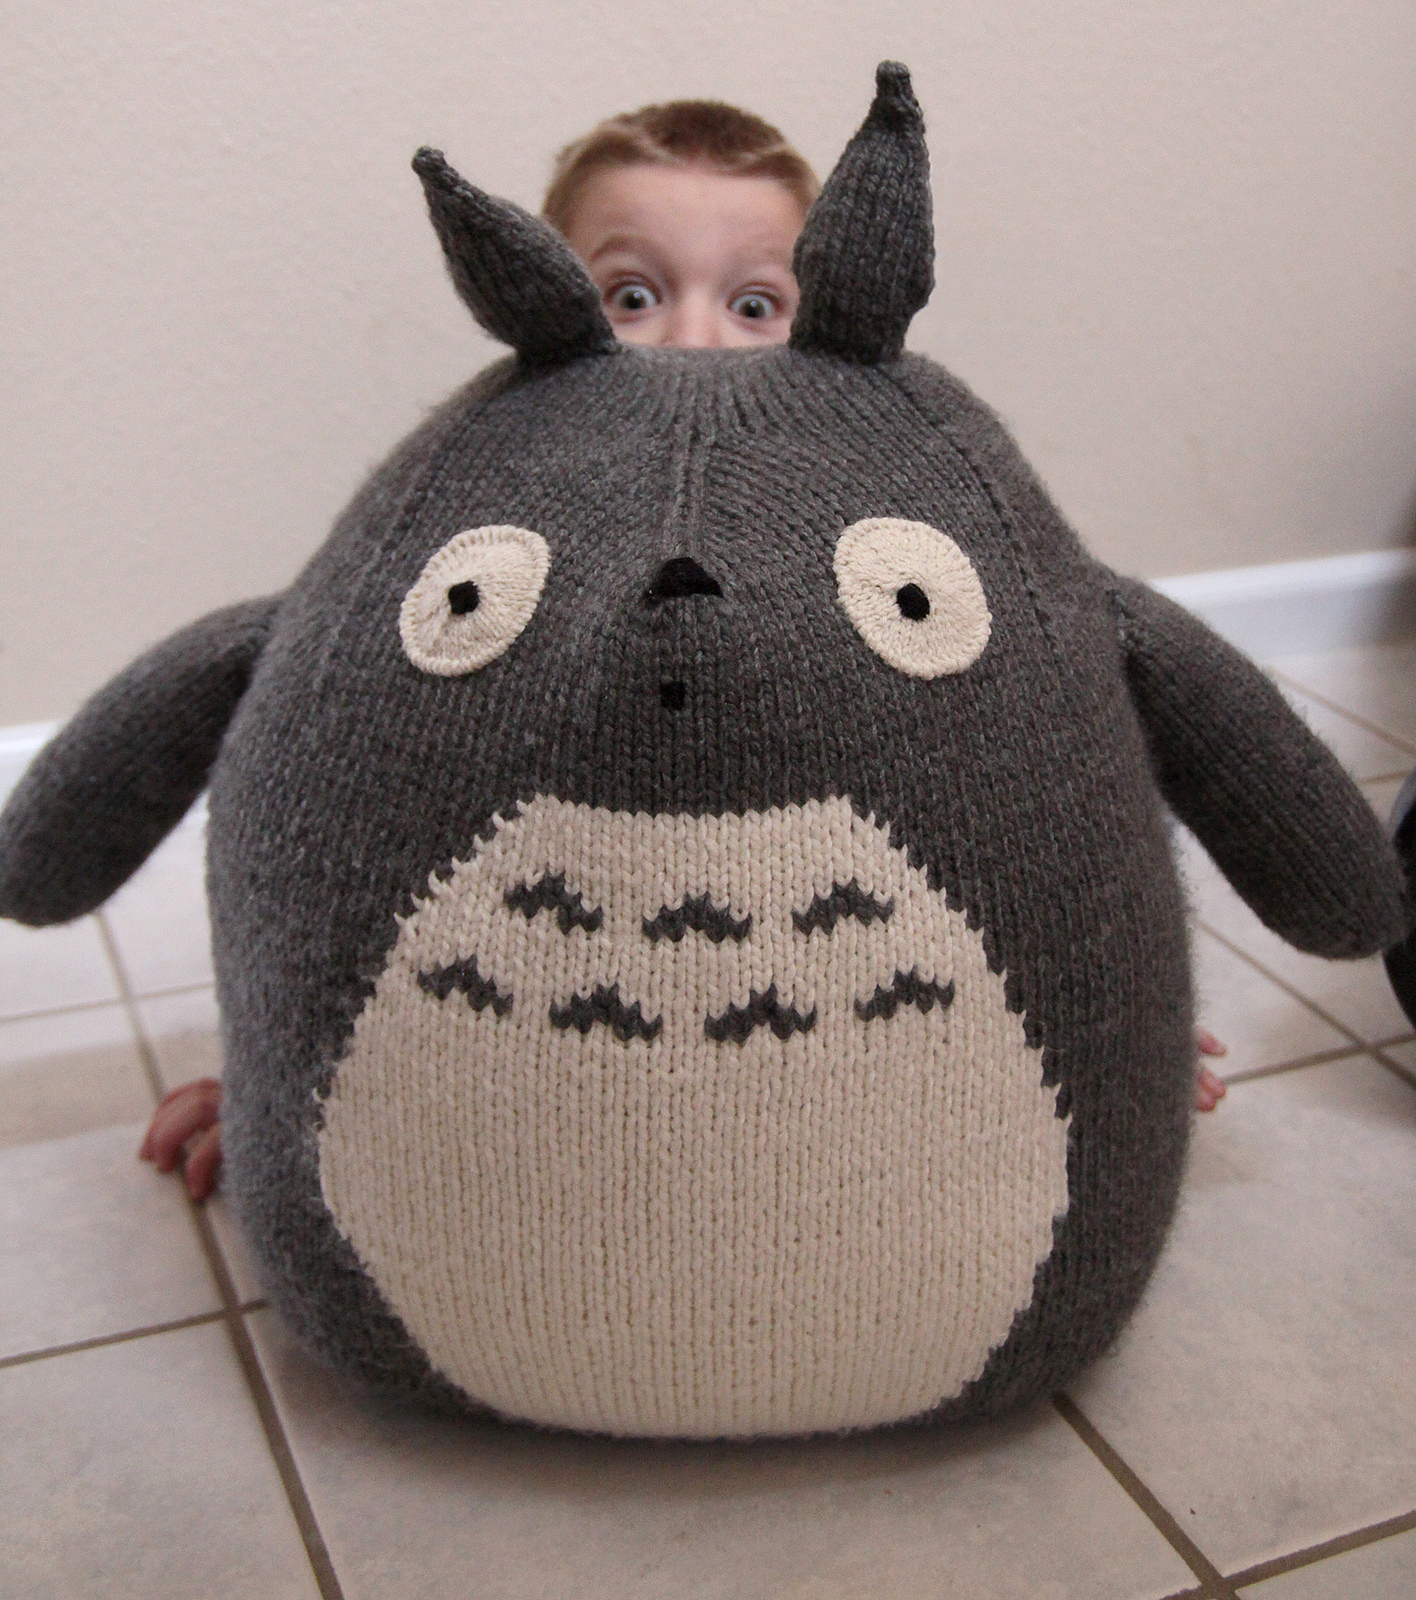 Knitting Patterns For Baby Toys 9 Totoro Knitting Pattern The Funky Stitch